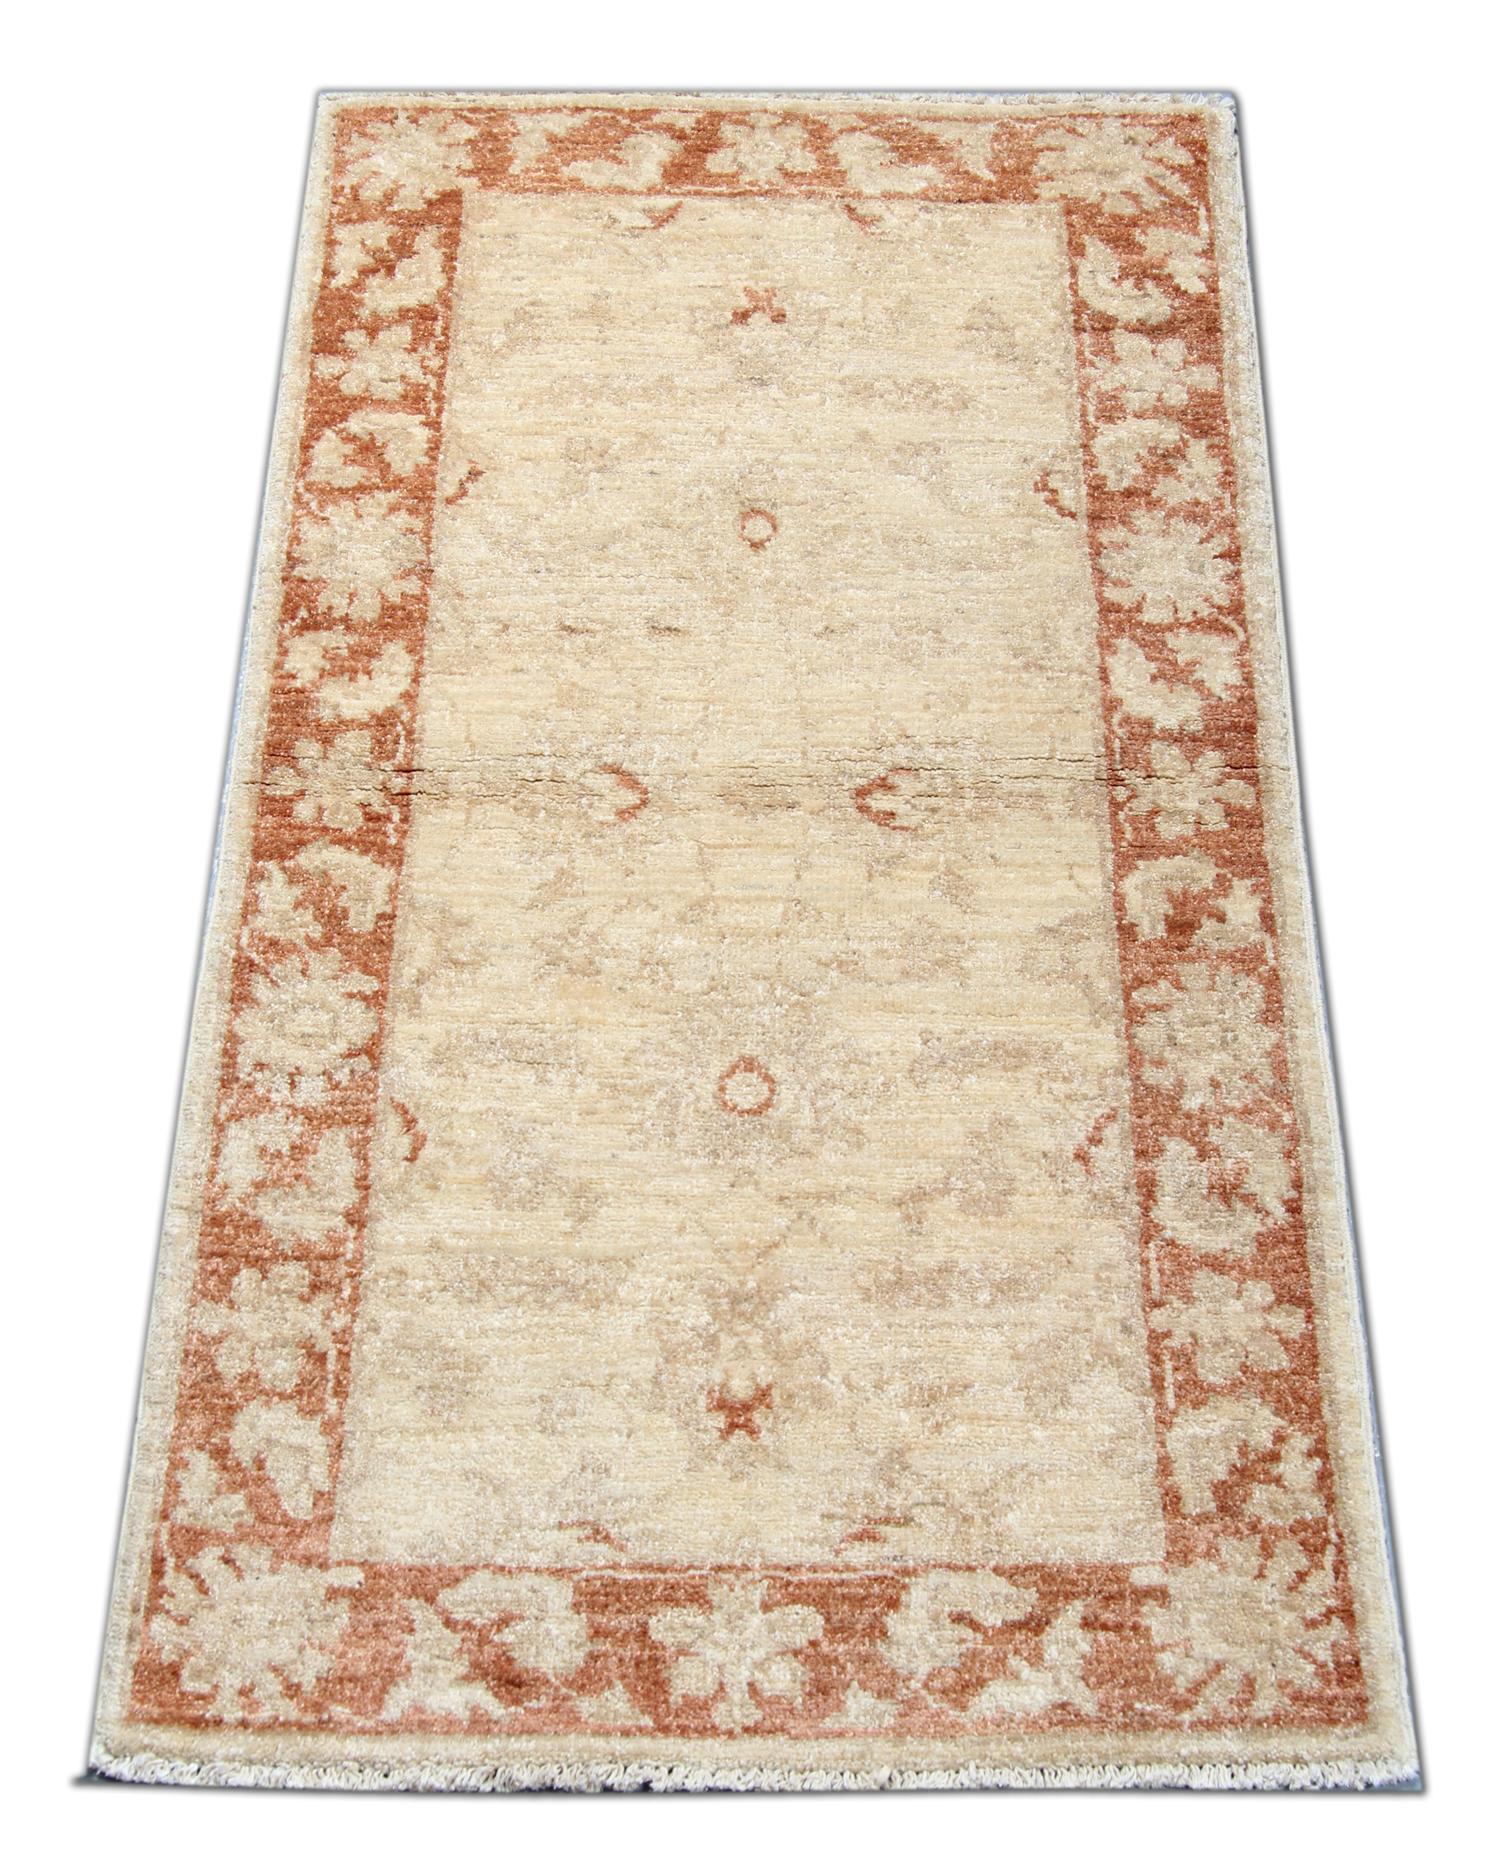 This traditional Ziegler rug is one of our more luxurious rugs made on looms by master weavers of Afghan rugs. This cream rug is made with or all handspun wool, with the color coming from organic vegetable dyes. This carpet features an all-over